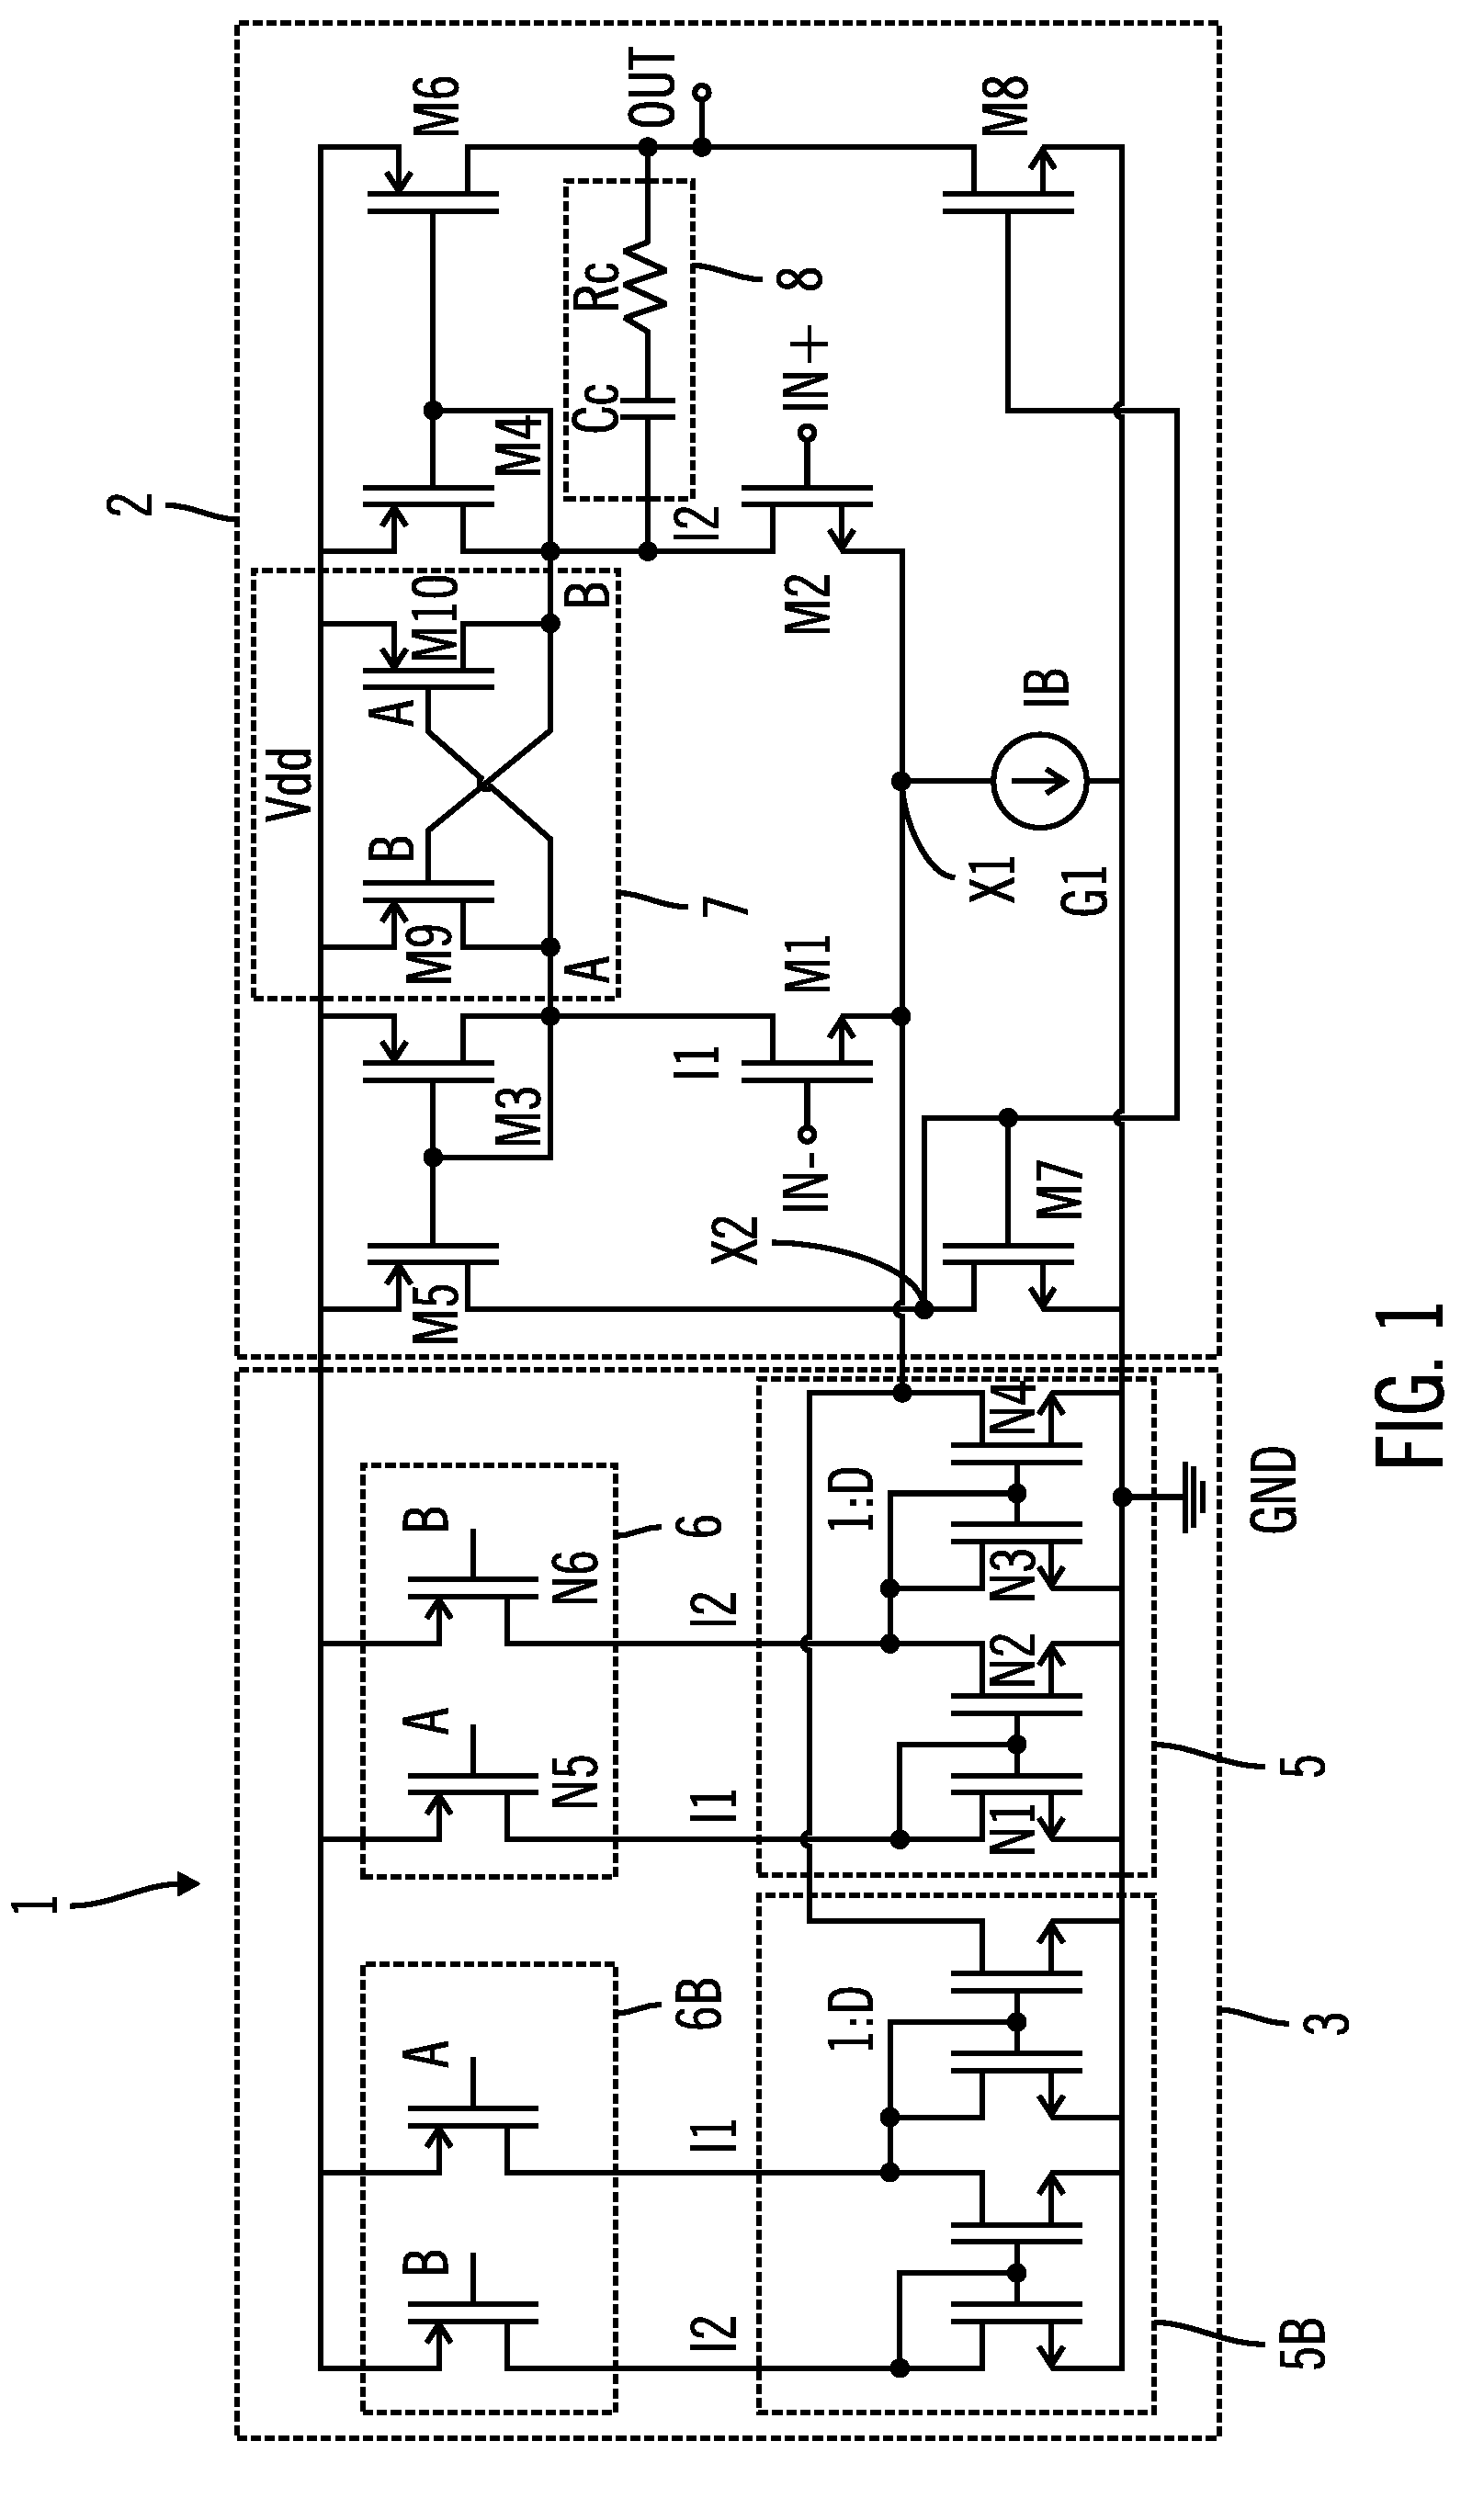 Operational amplifier of class AB